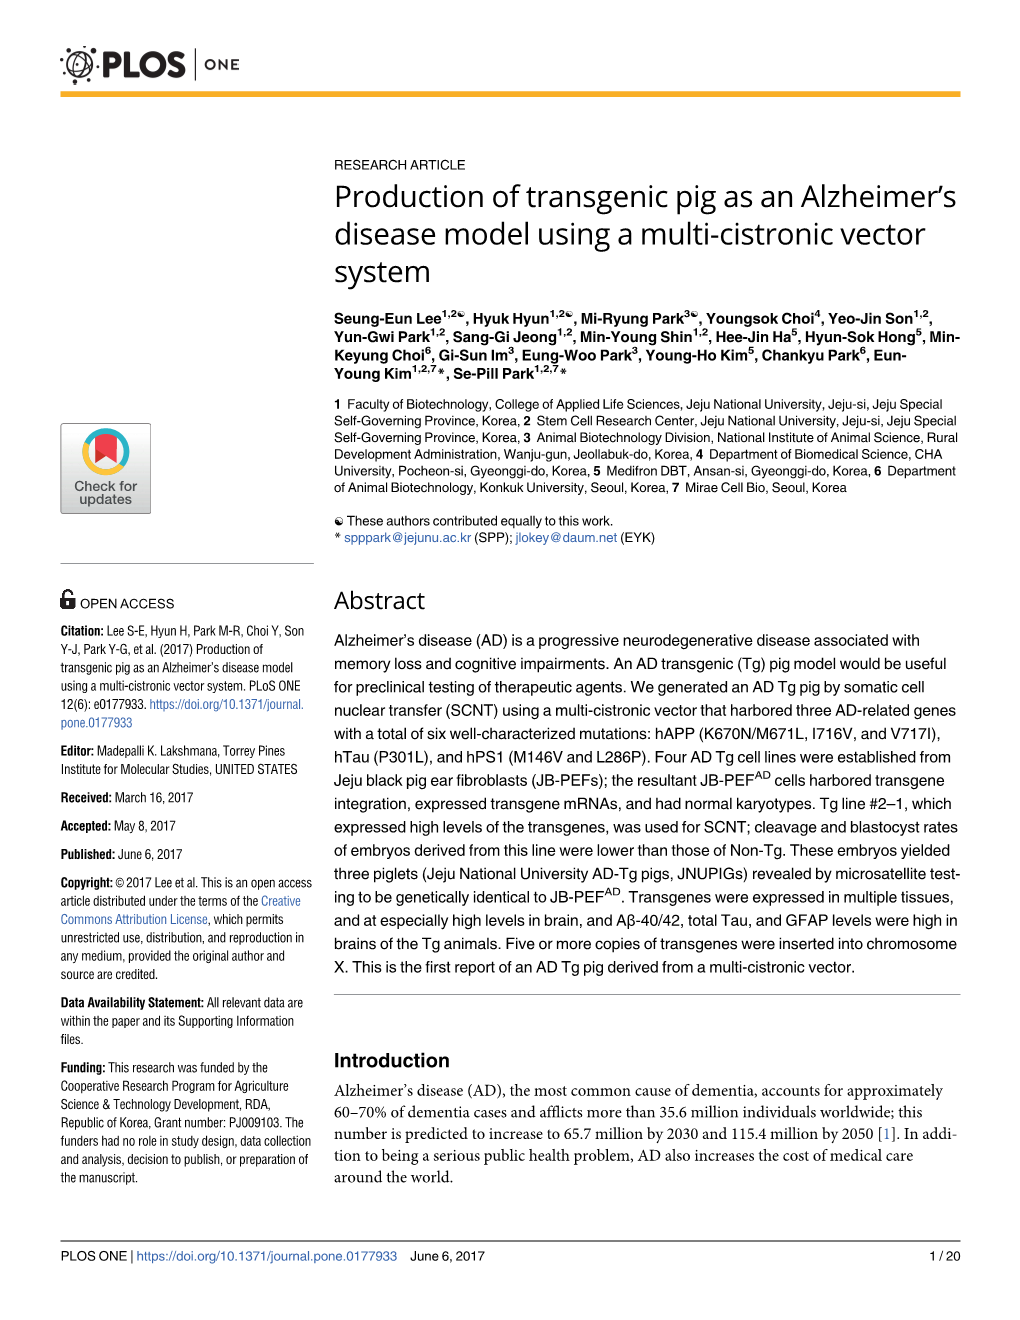 Production of Transgenic Pig As an Alzheimer's Disease Model Using A